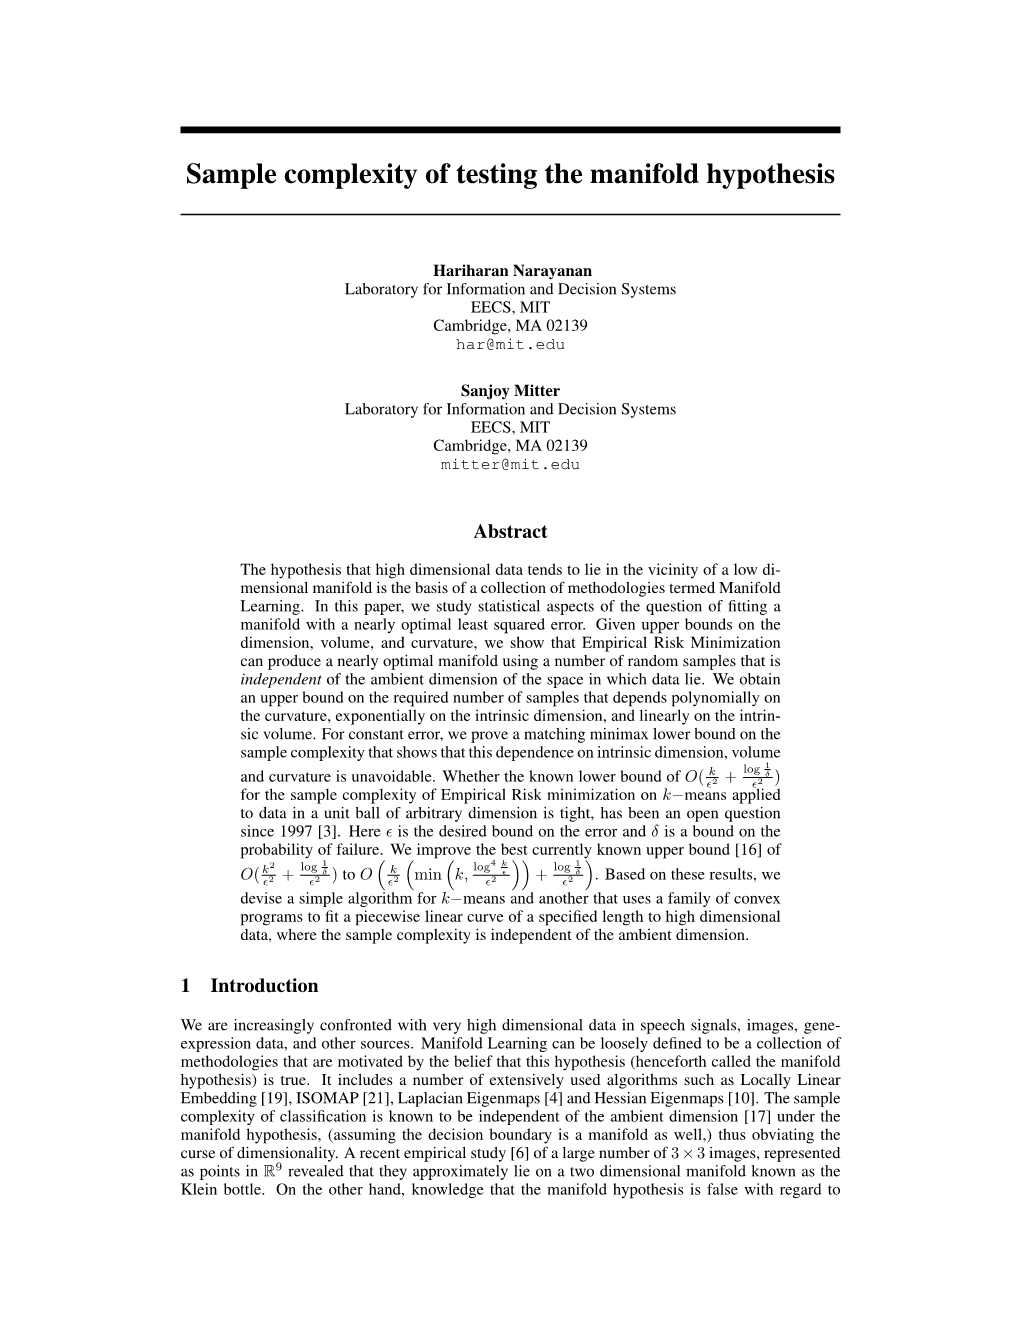 Sample Complexity of Testing the Manifold Hypothesis